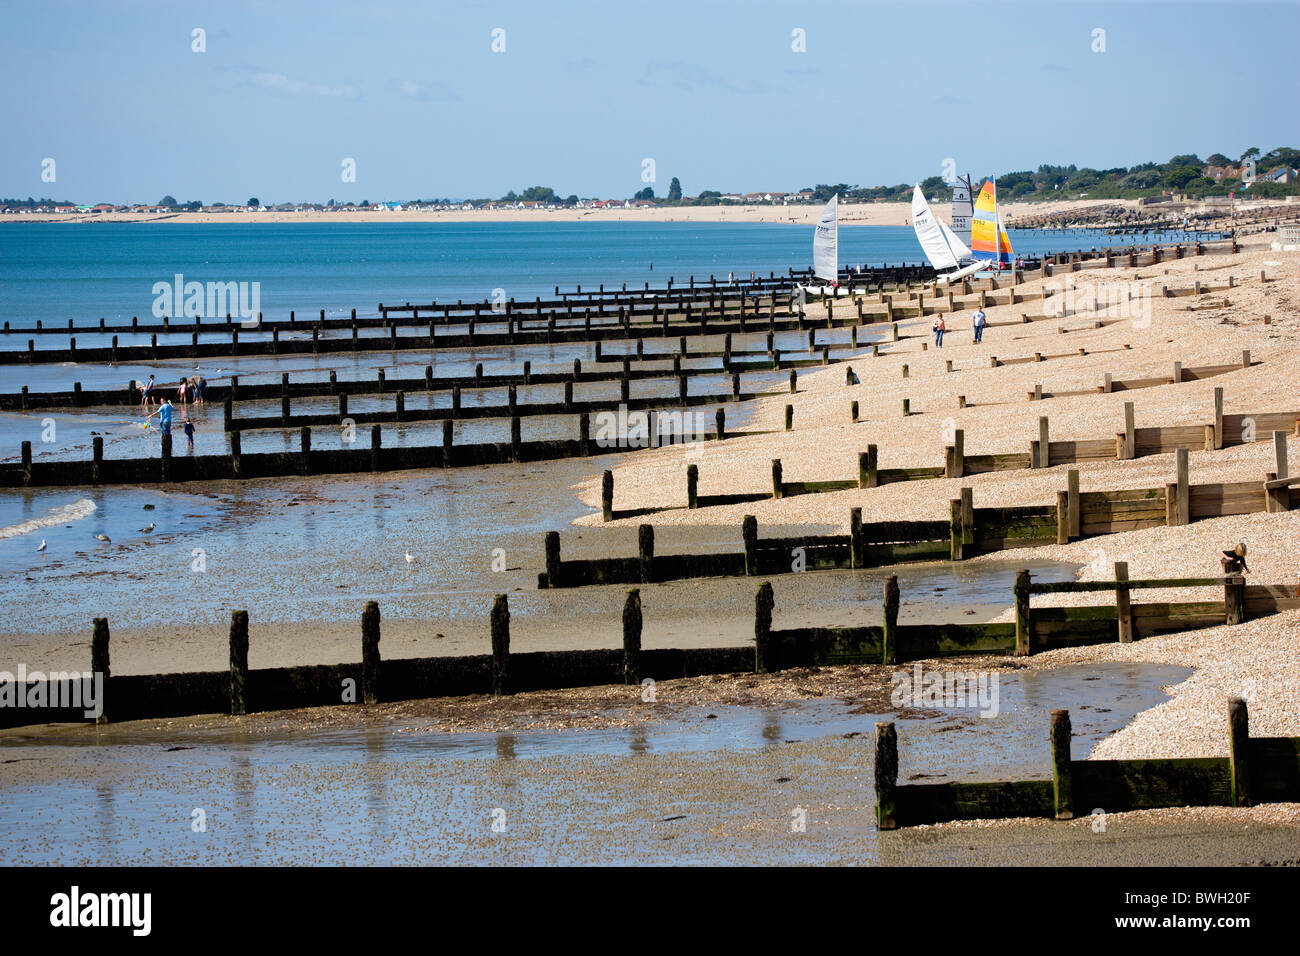 England, West Sussex, Bognor Regis, Wooden groynes at low tide used as sea defences against erosion of the shingle pebble beach Stock Photo